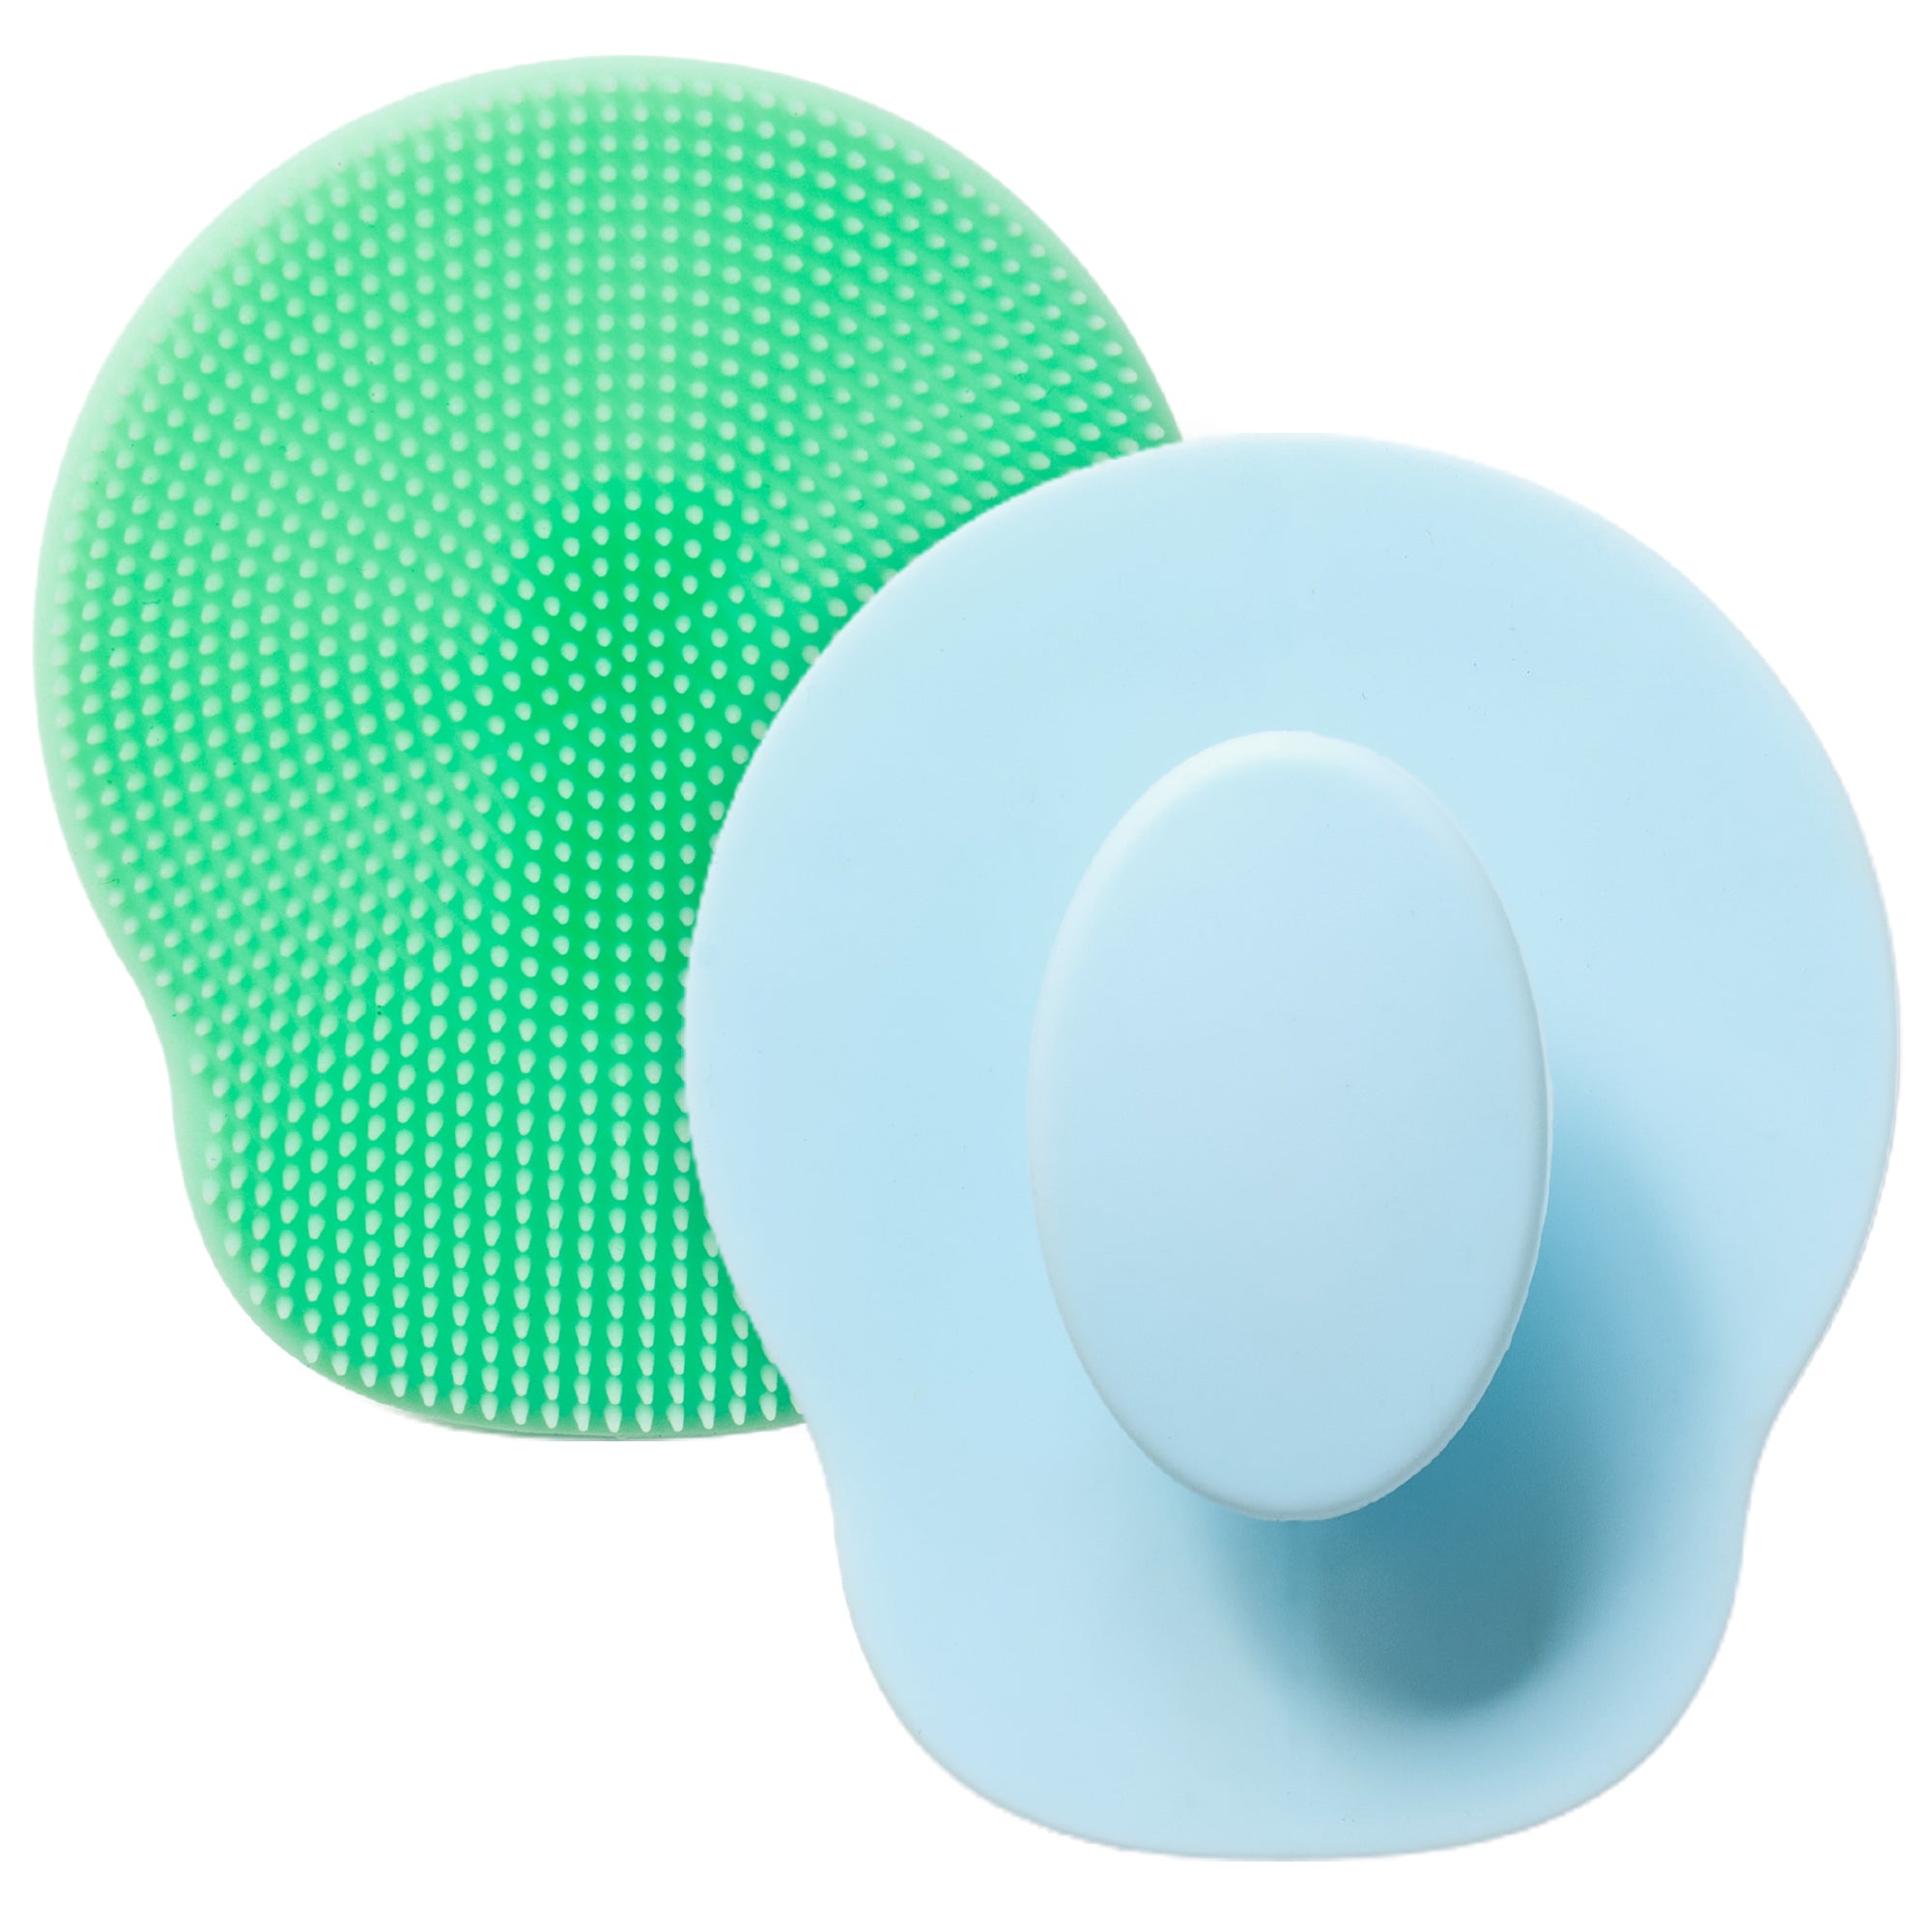 KLOY Silicone Face Cleansing Scrubber for Exfoliation, Massaging (Pack of 2)